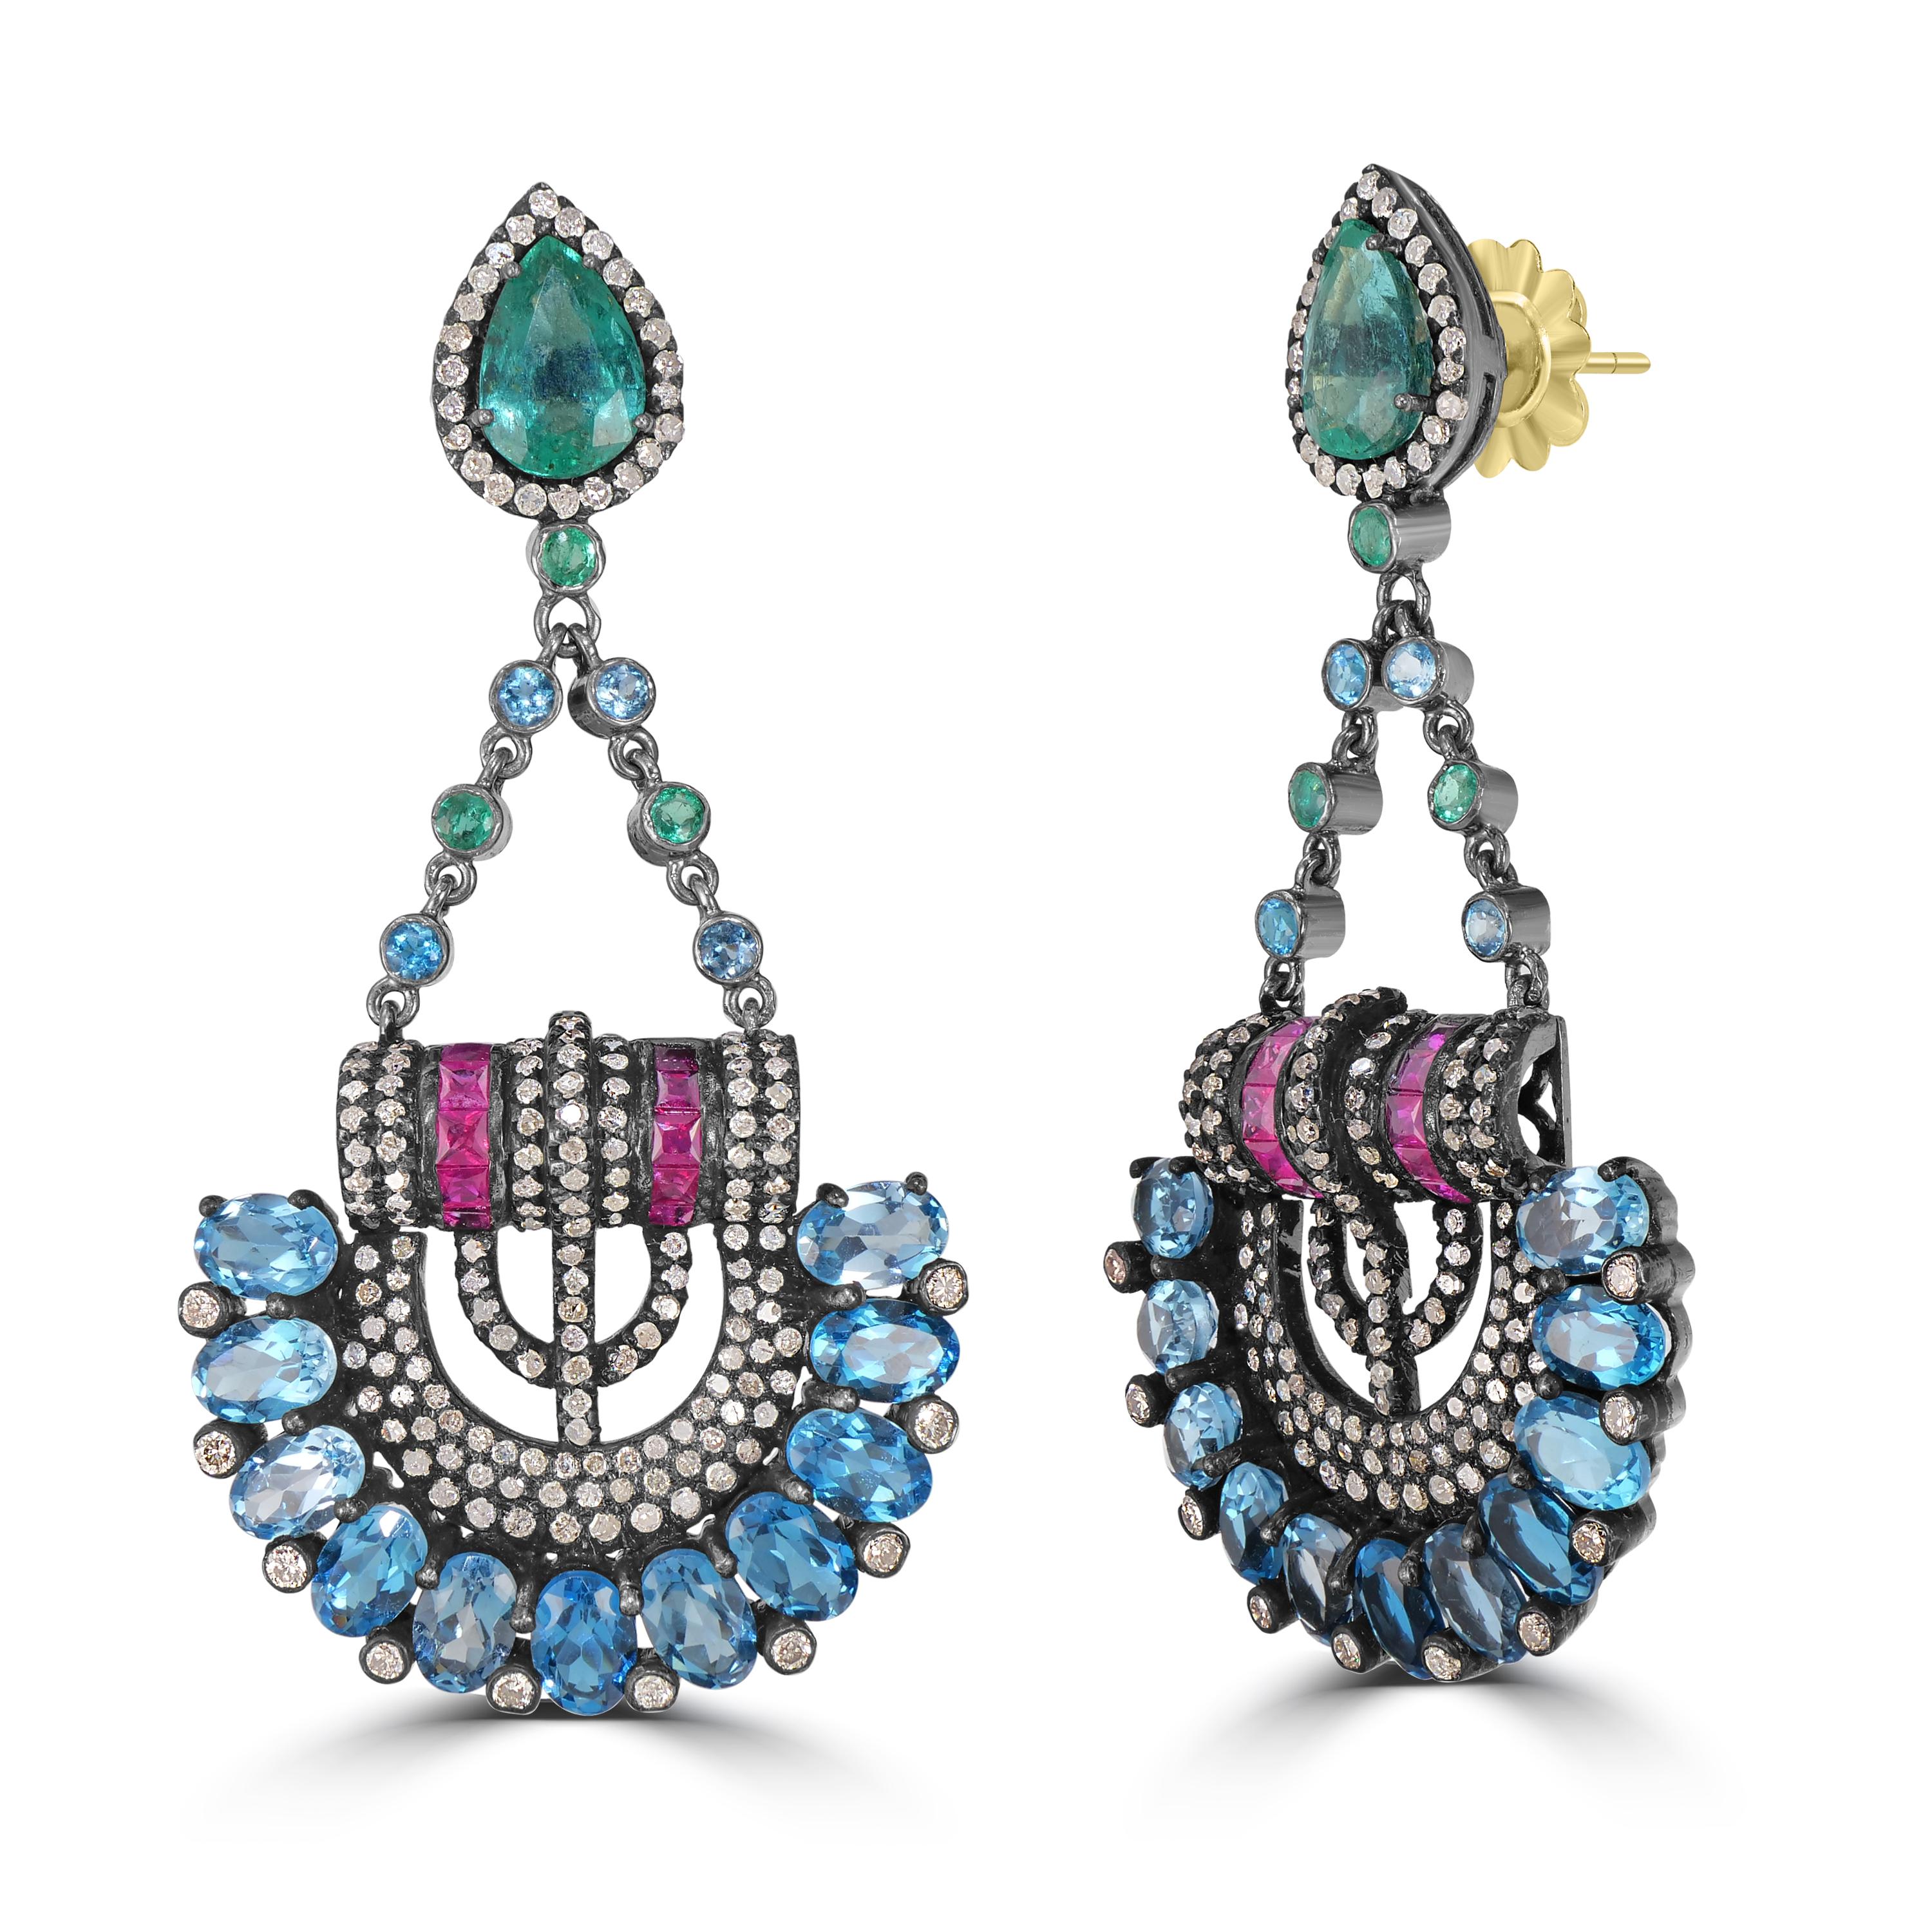 Presenting our Victorian 20.86 Cttw. Emerald, Ruby, Blue Topaz, and Diamond Dangle Earrings – a mesmerizing symphony of colors and elegance.

Designed like a hanging cradle, these earrings showcase meticulous craftsmanship and an exquisite